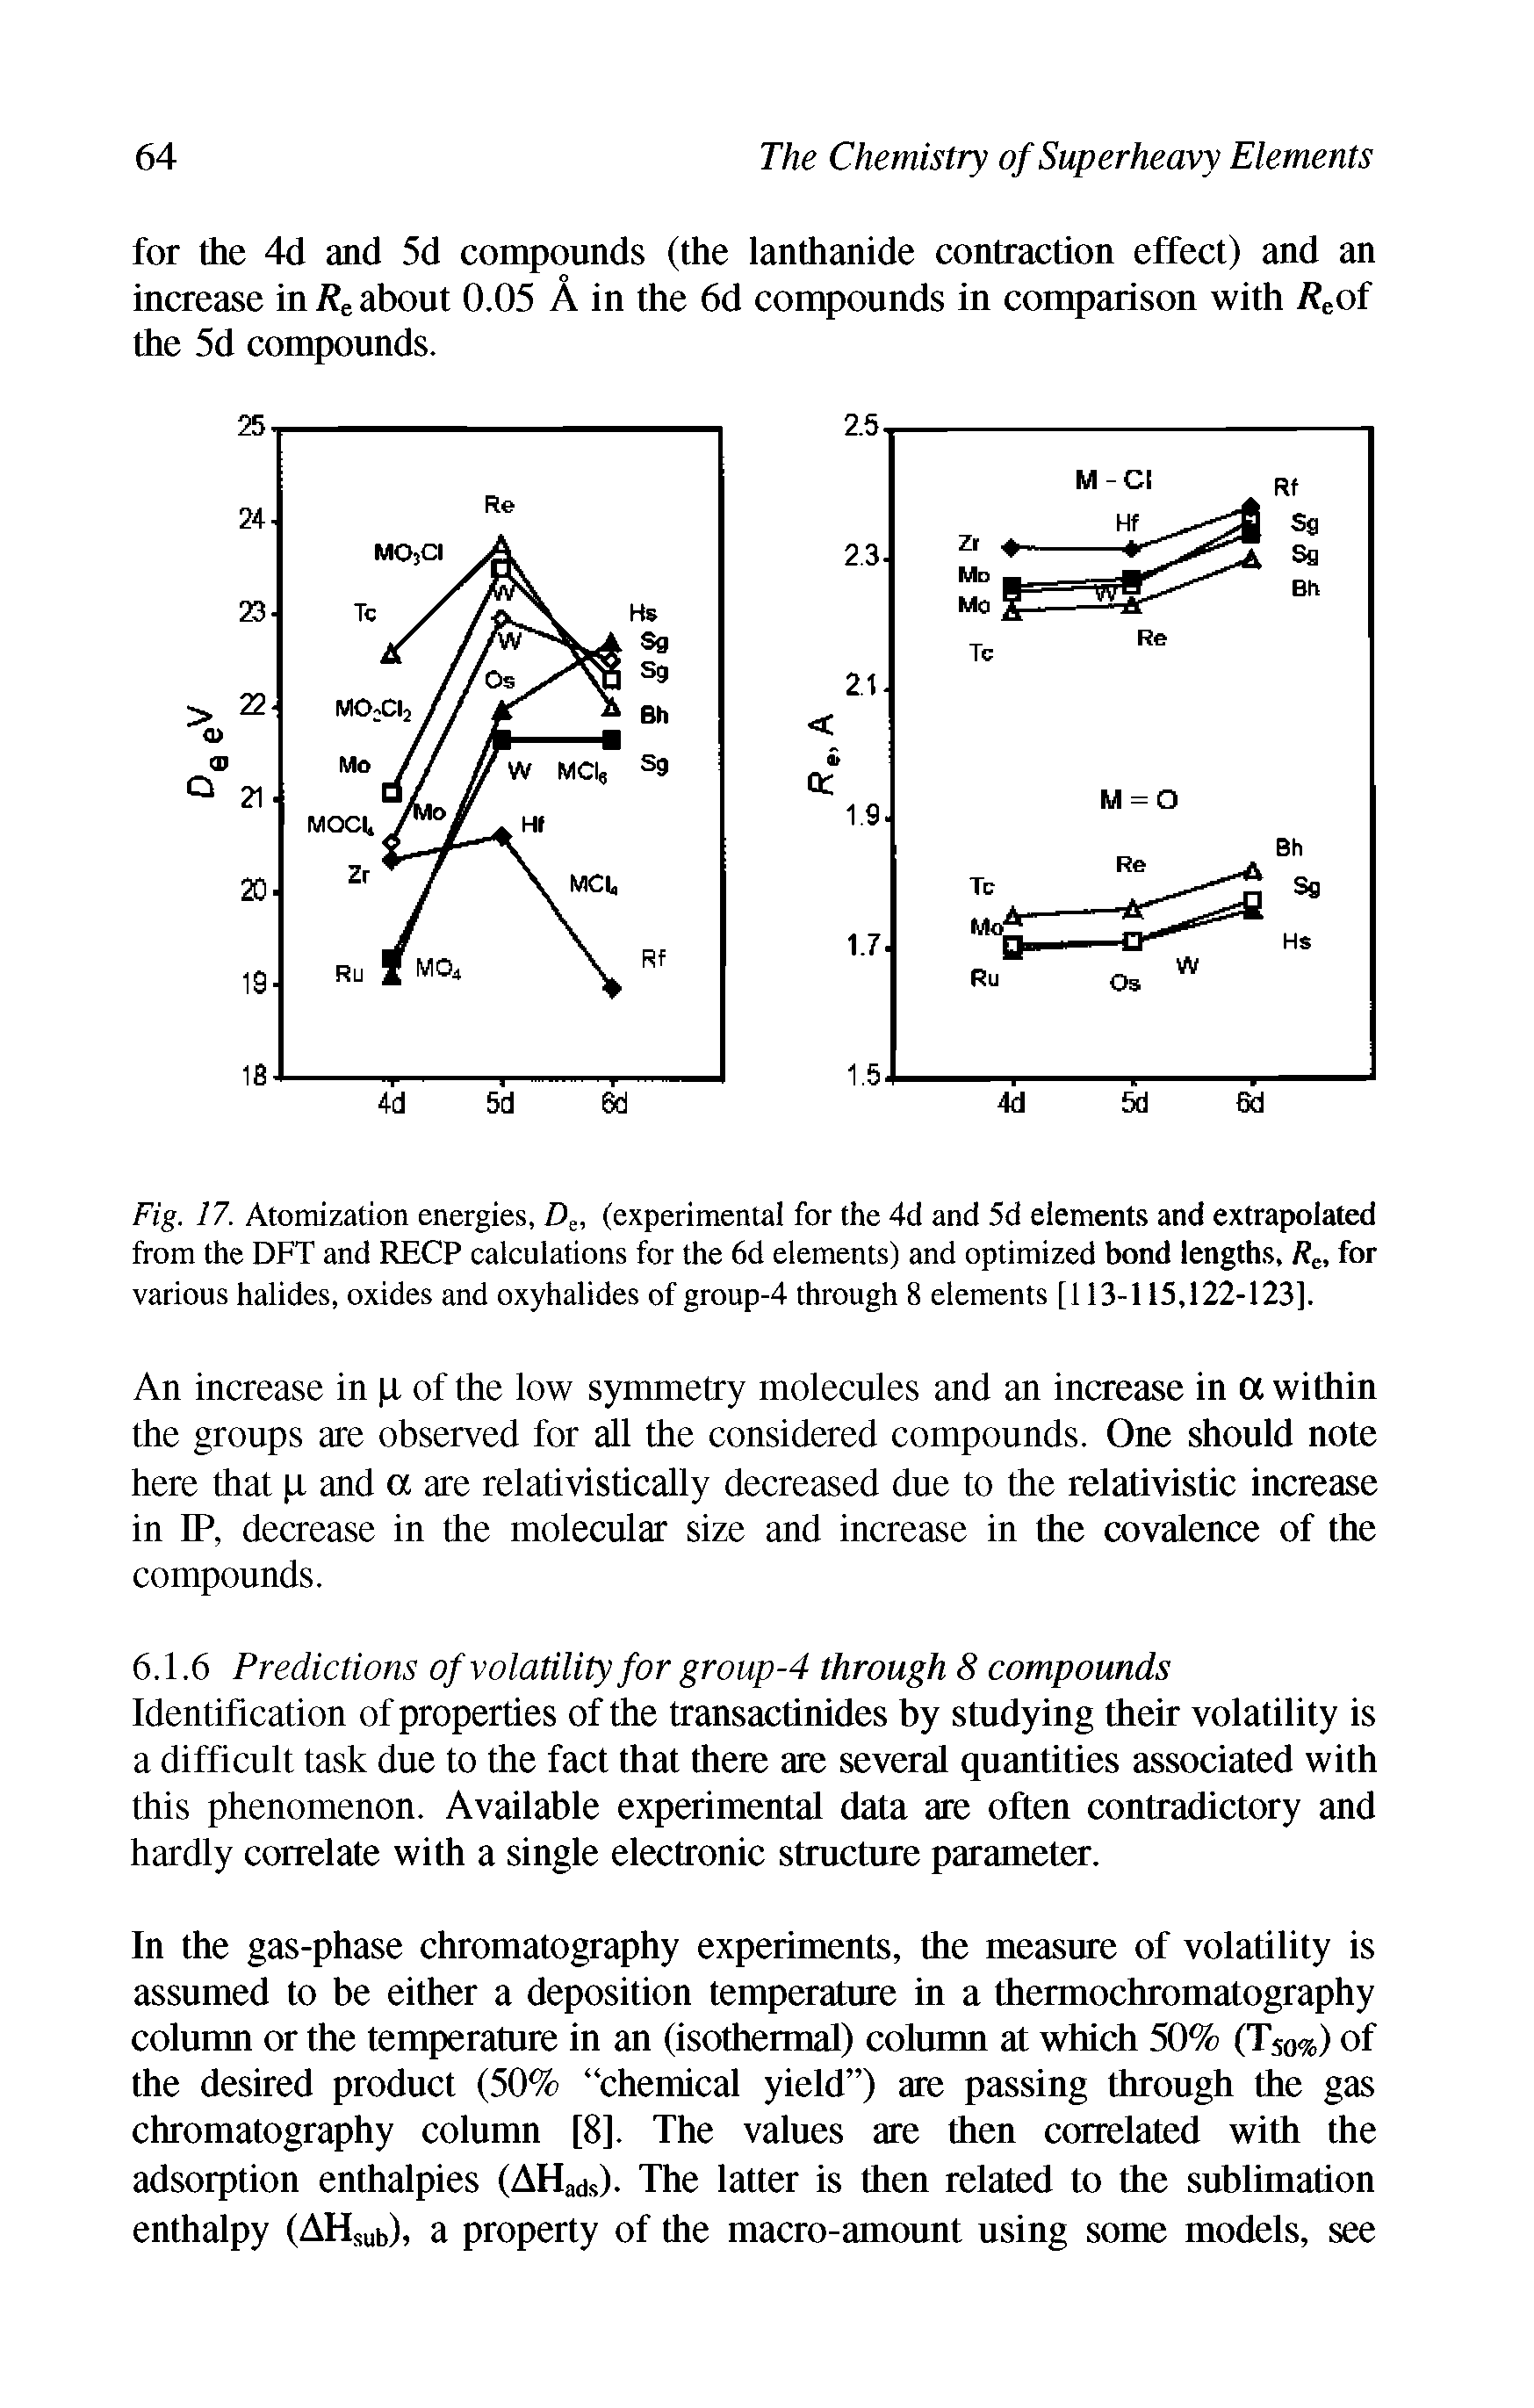 Fig. 17. Atomization energies, De, (experimental for the 4d and 5d elements and extrapolated from the DFT and RECP calculations for the 6d elements) and optimized bond lengths, Rc, for various halides, oxides and oxyhalides of group-4 through 8 elements [113-115,122-123].